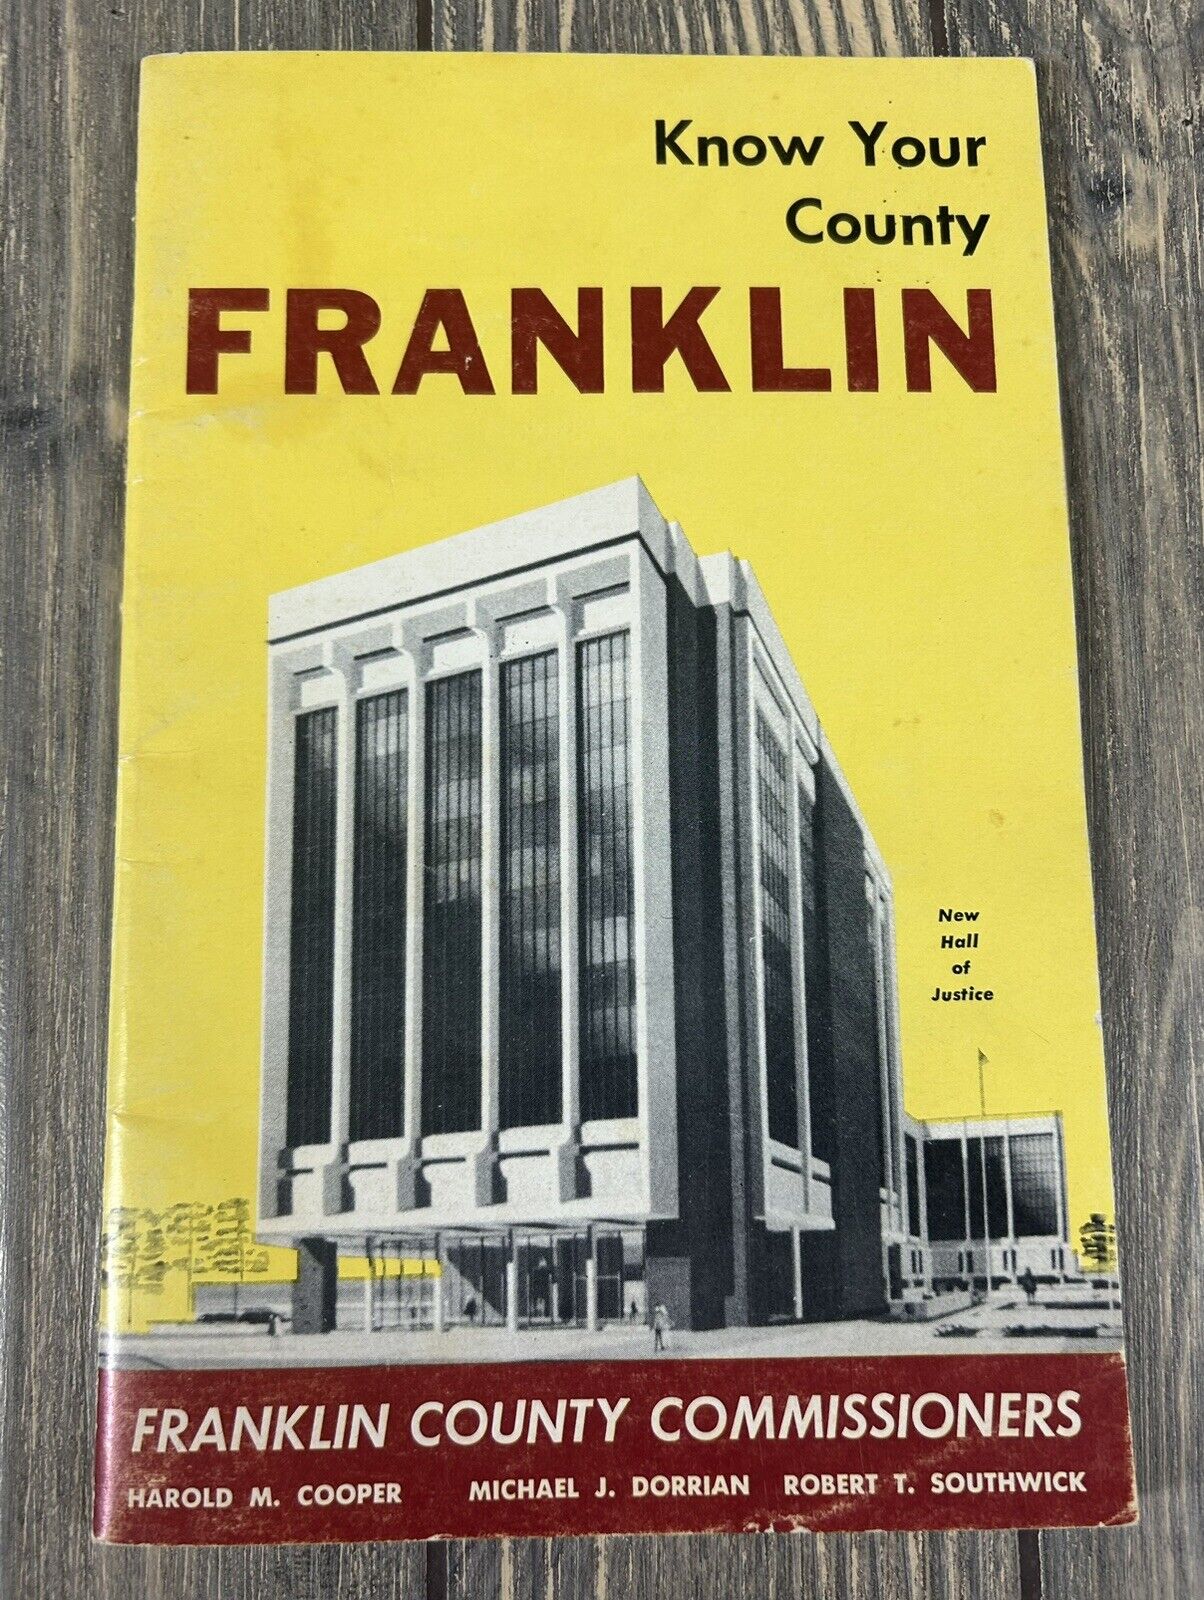 Vintage Know Your County Franklin Franklin County Commissioners Booklet